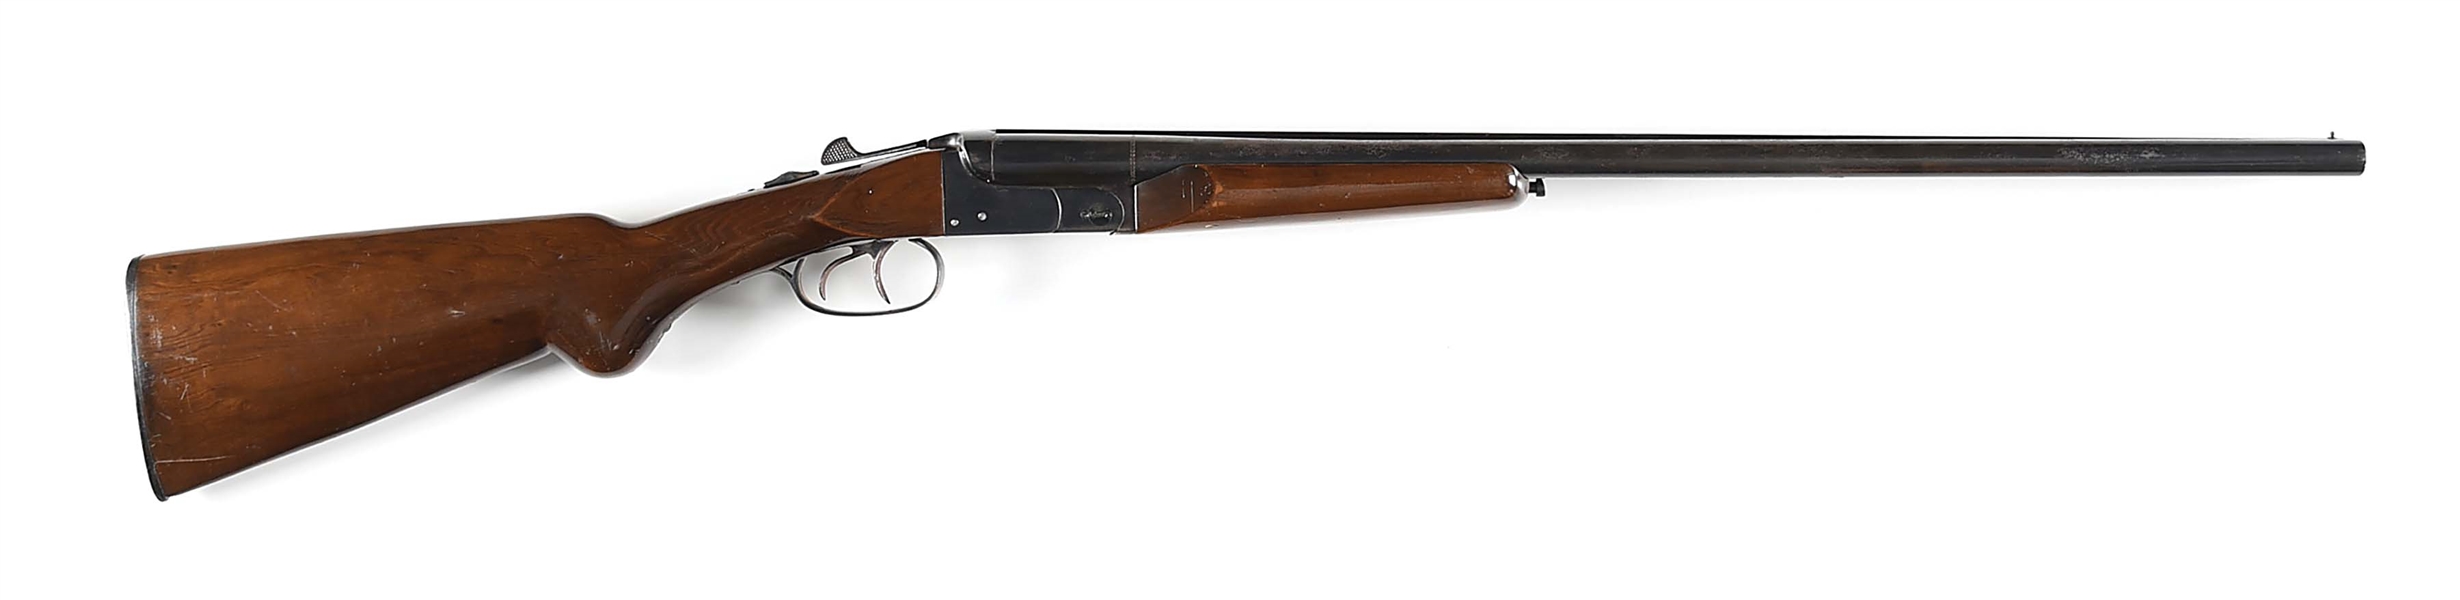 (M) AMADEO ROSSI SQUIRE 20 BORE SIDE BY SIDE SHOTGUN.